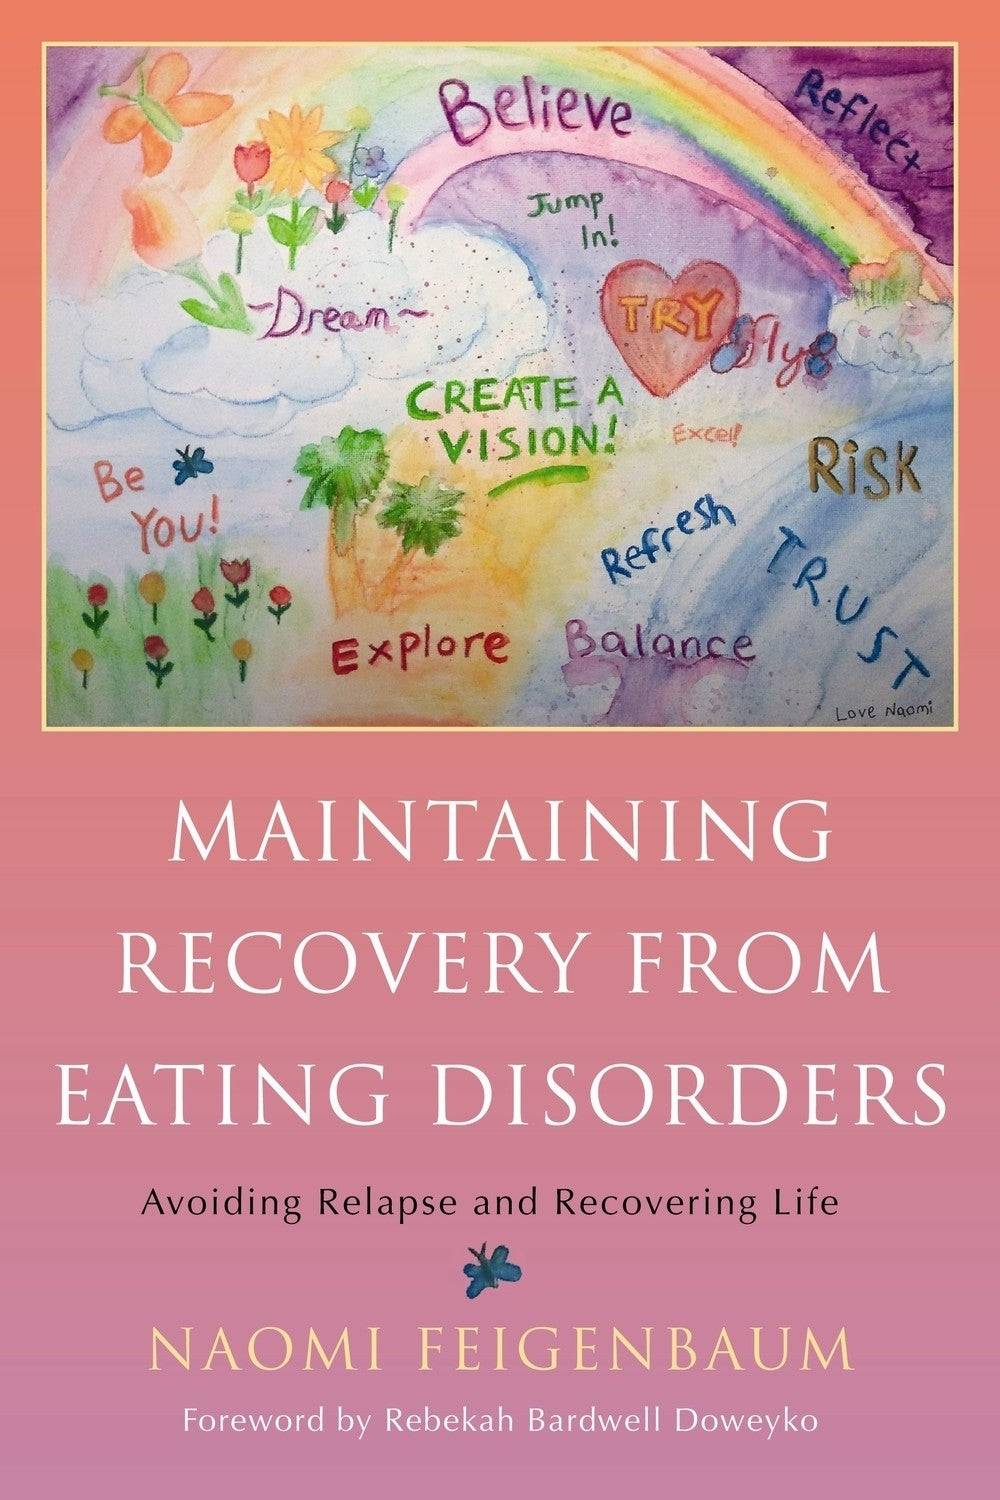 Maintaining Recovery from Eating Disorders by Rebekah Bardwell, Naomi Feigenbaum